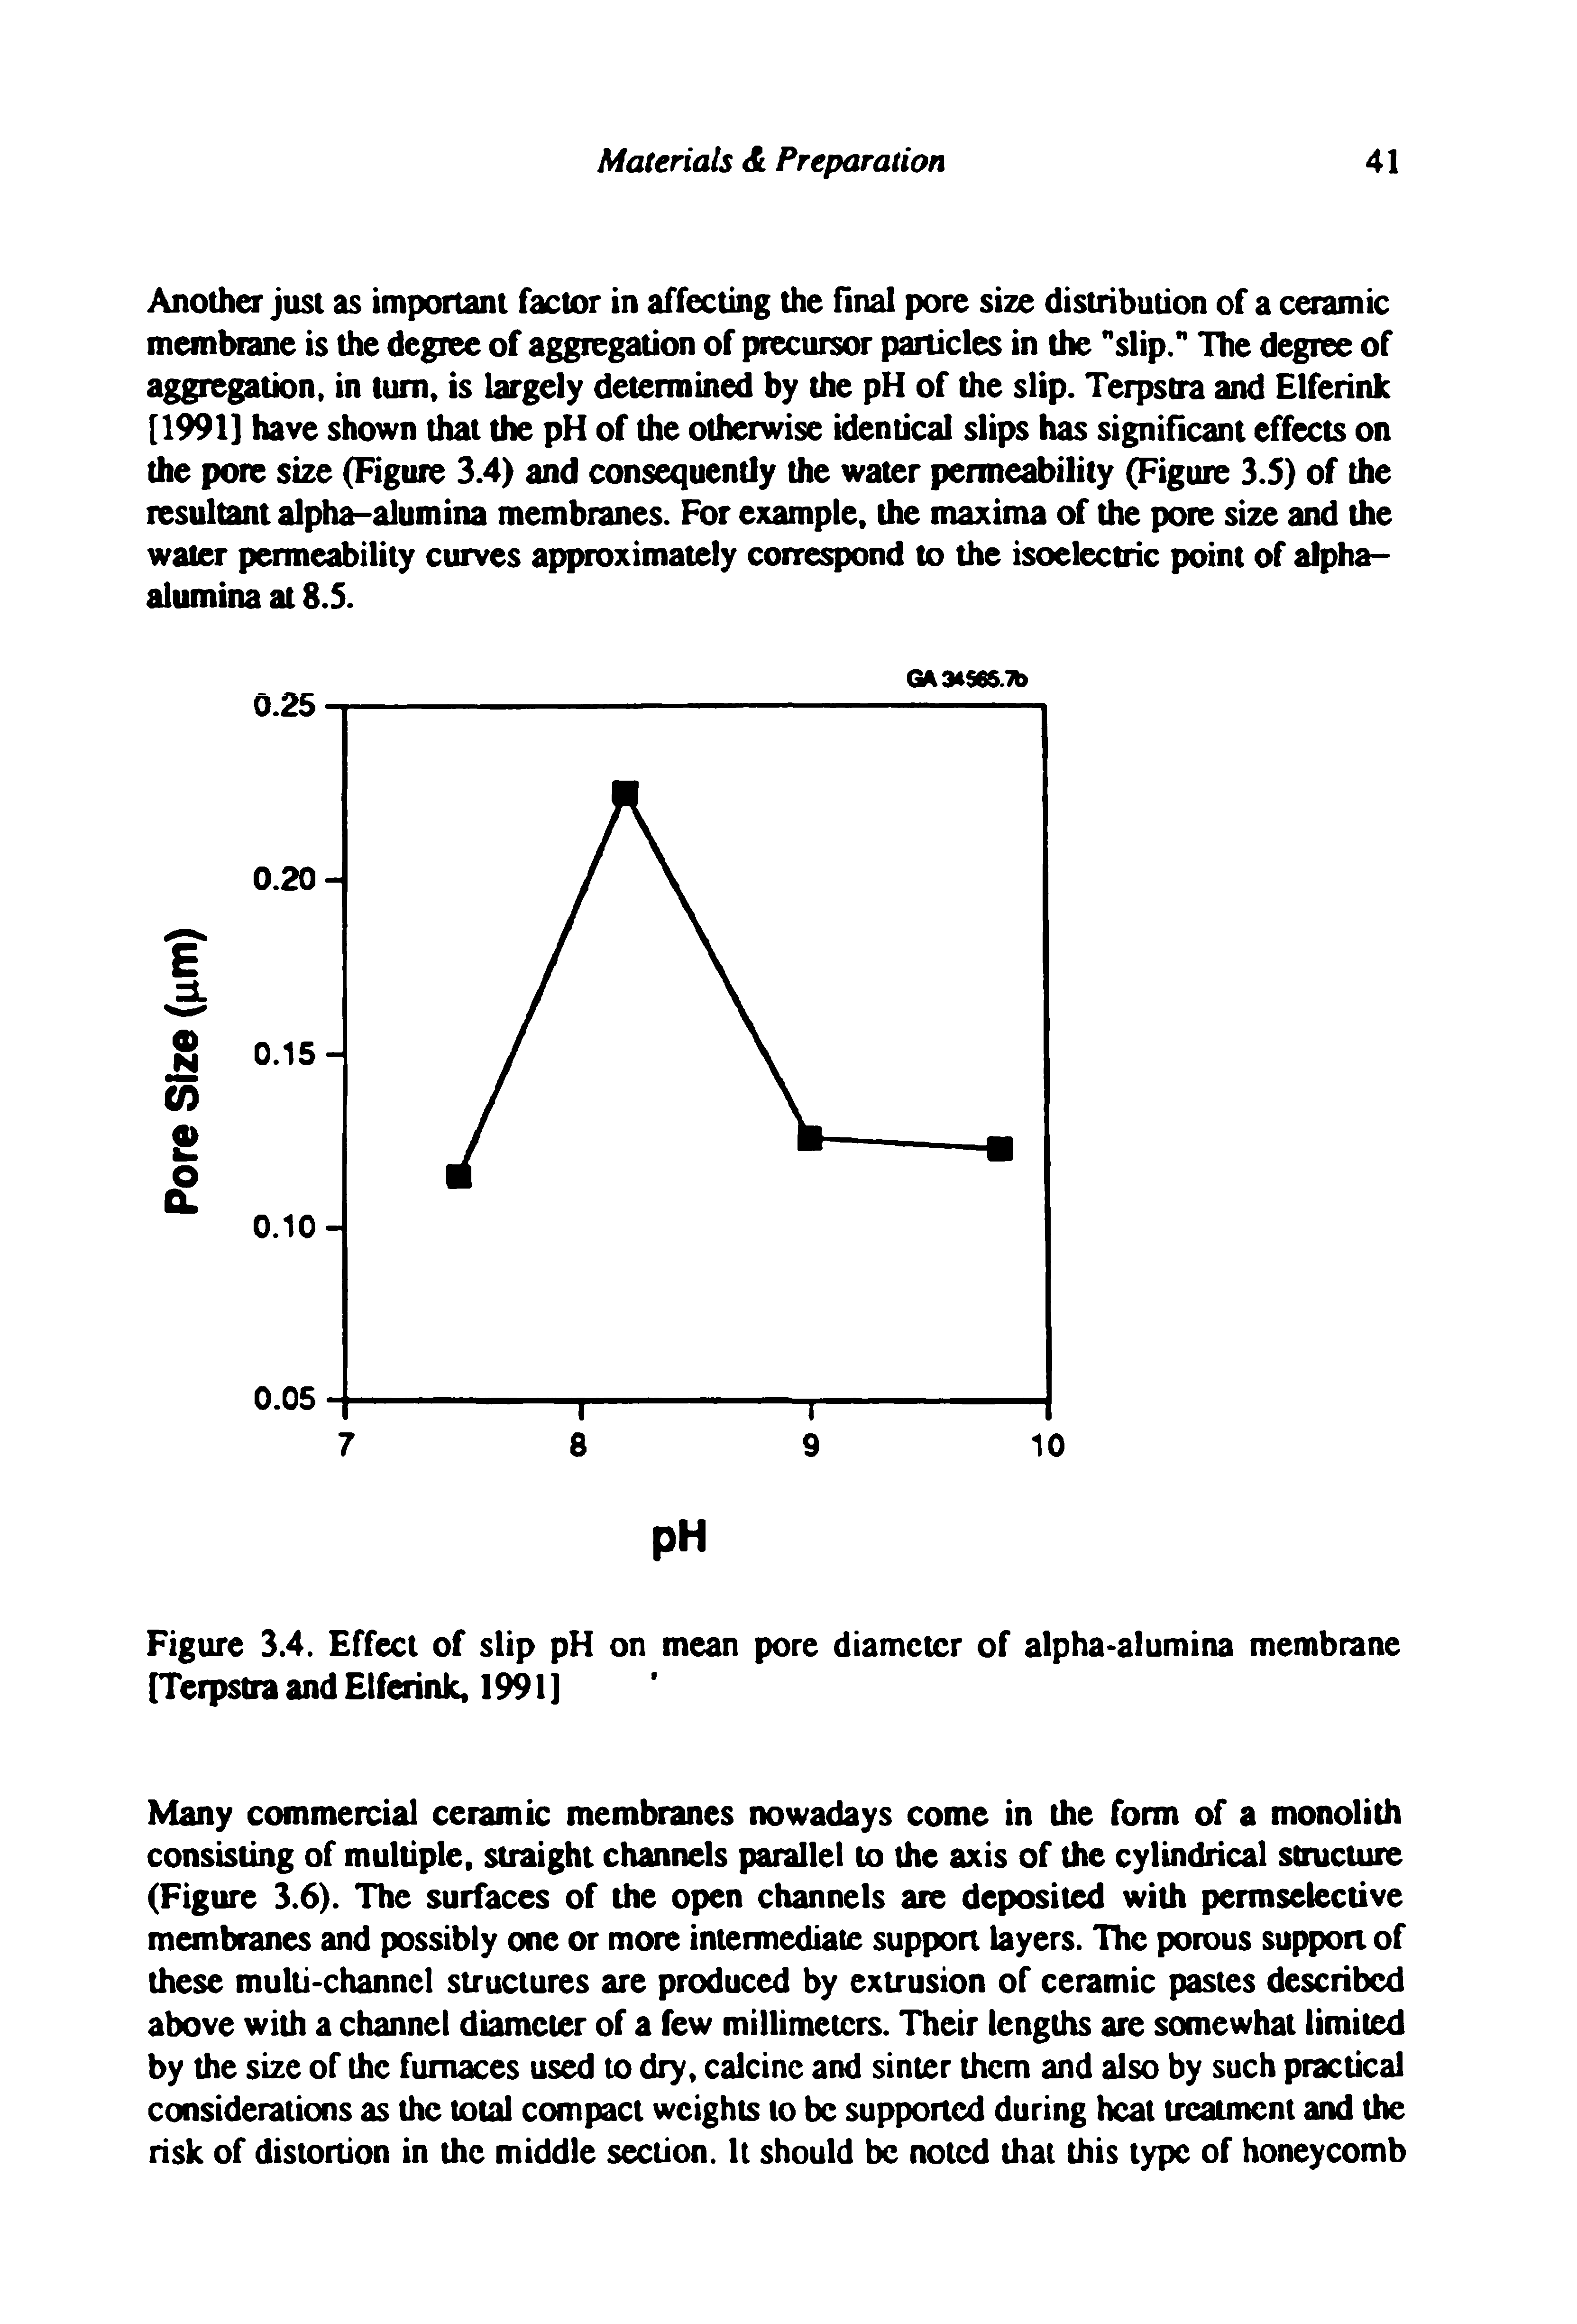 Figure 3.4. Effect of slip pH on mean pore diameter of alpha-alumina membrane fTerpstra and Elferink, 1991]...